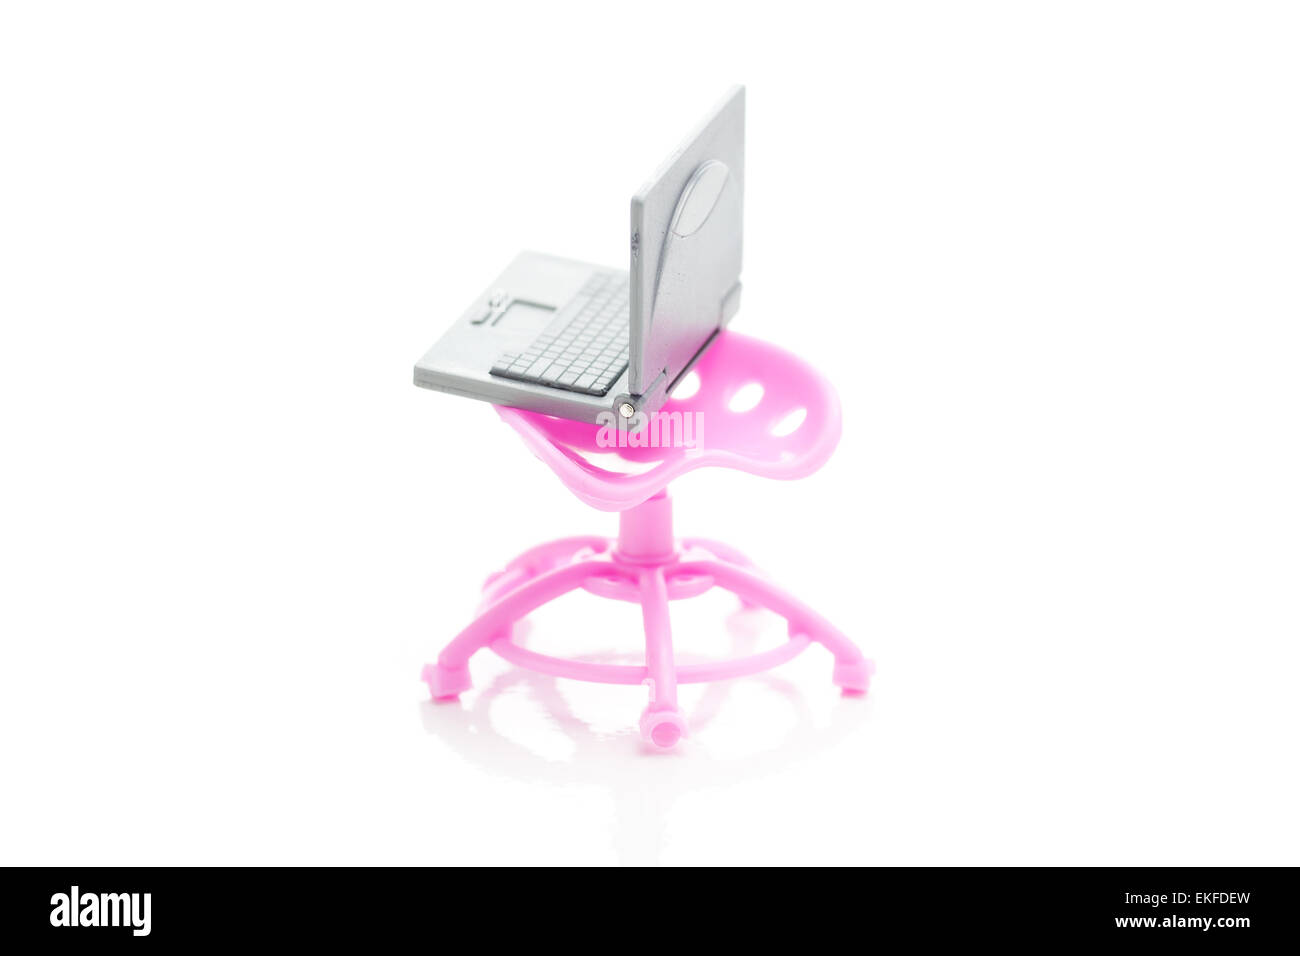 miniature laptop and chair isolated on white Stock Photo